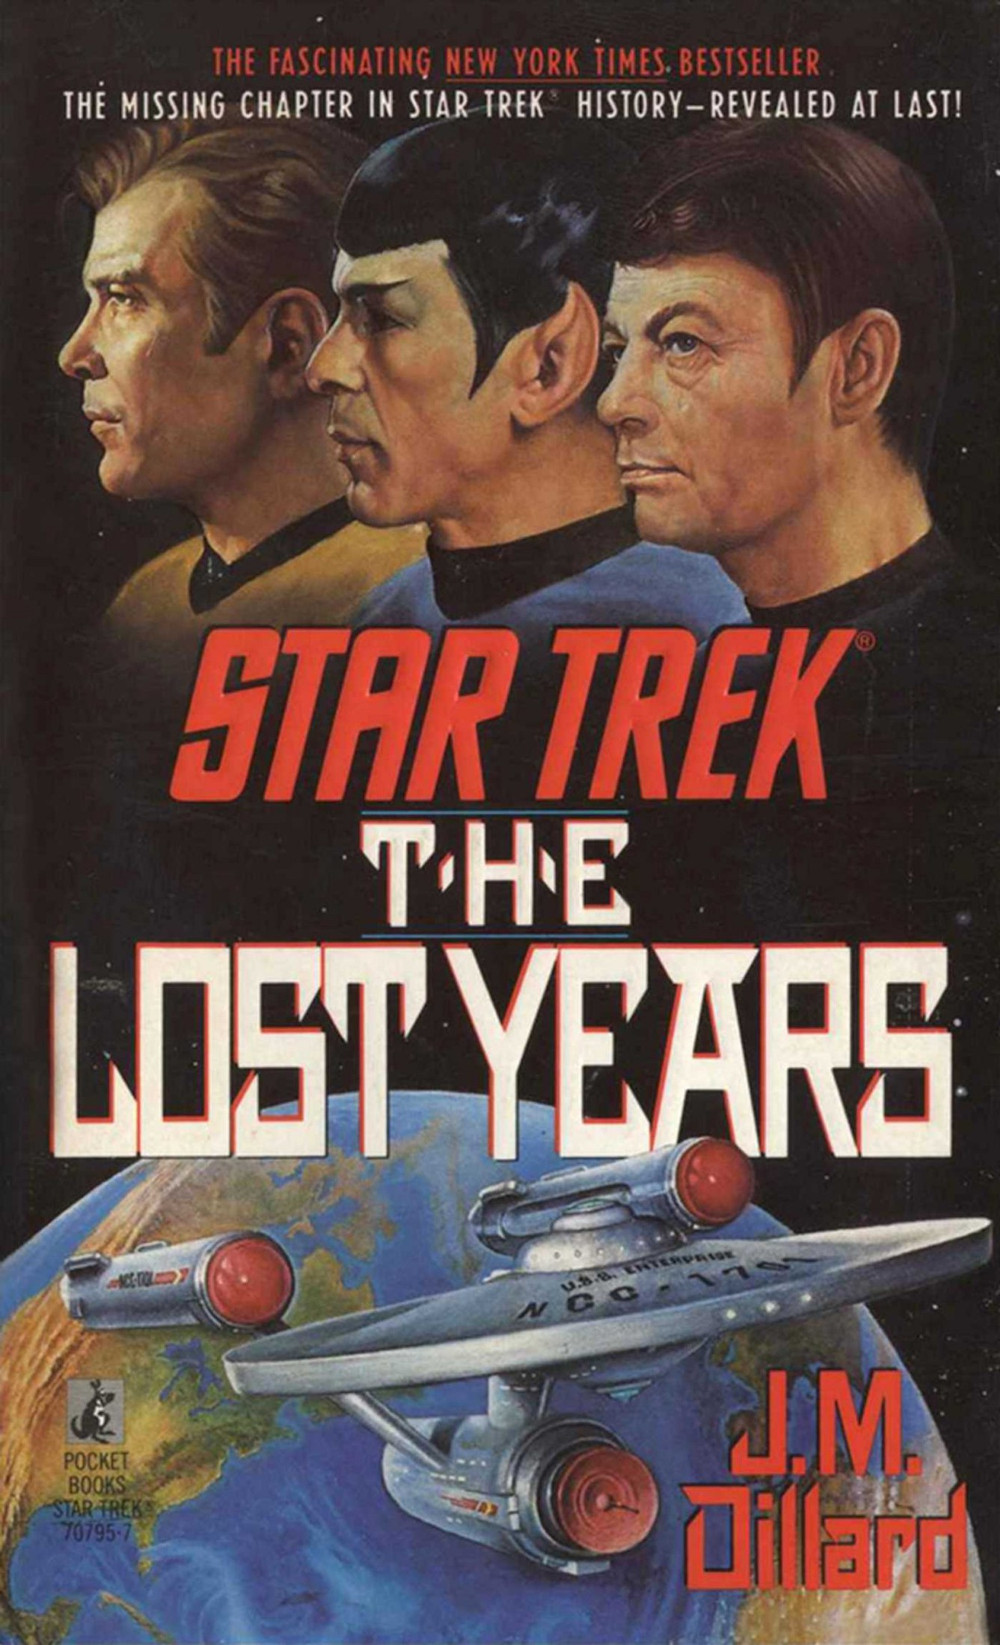 The Lost Years (Oct 1989)